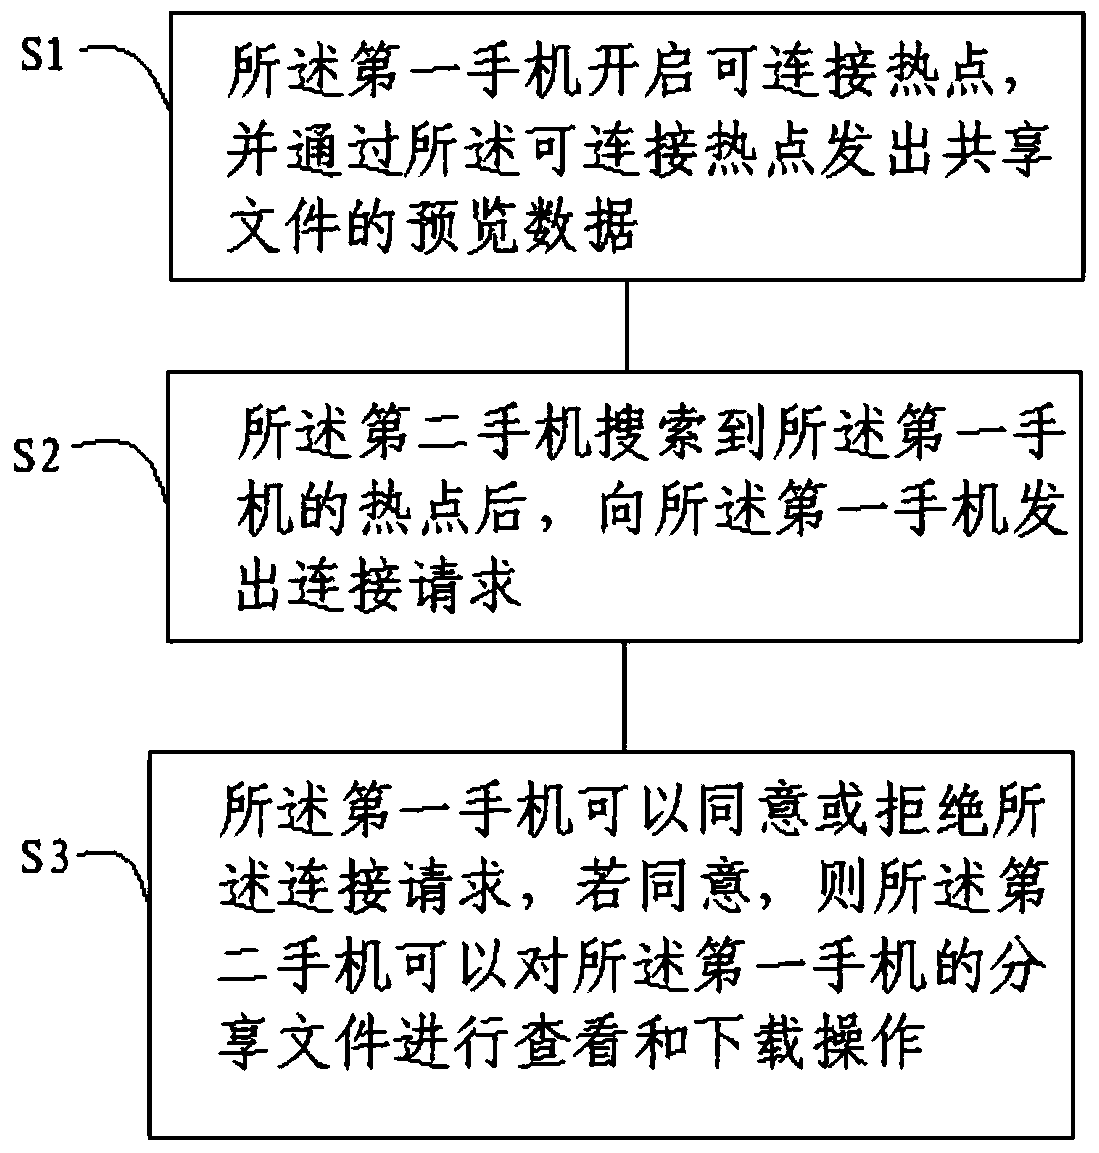 Method and system for realizing file sharing based on built-in base station of Android mobile phone